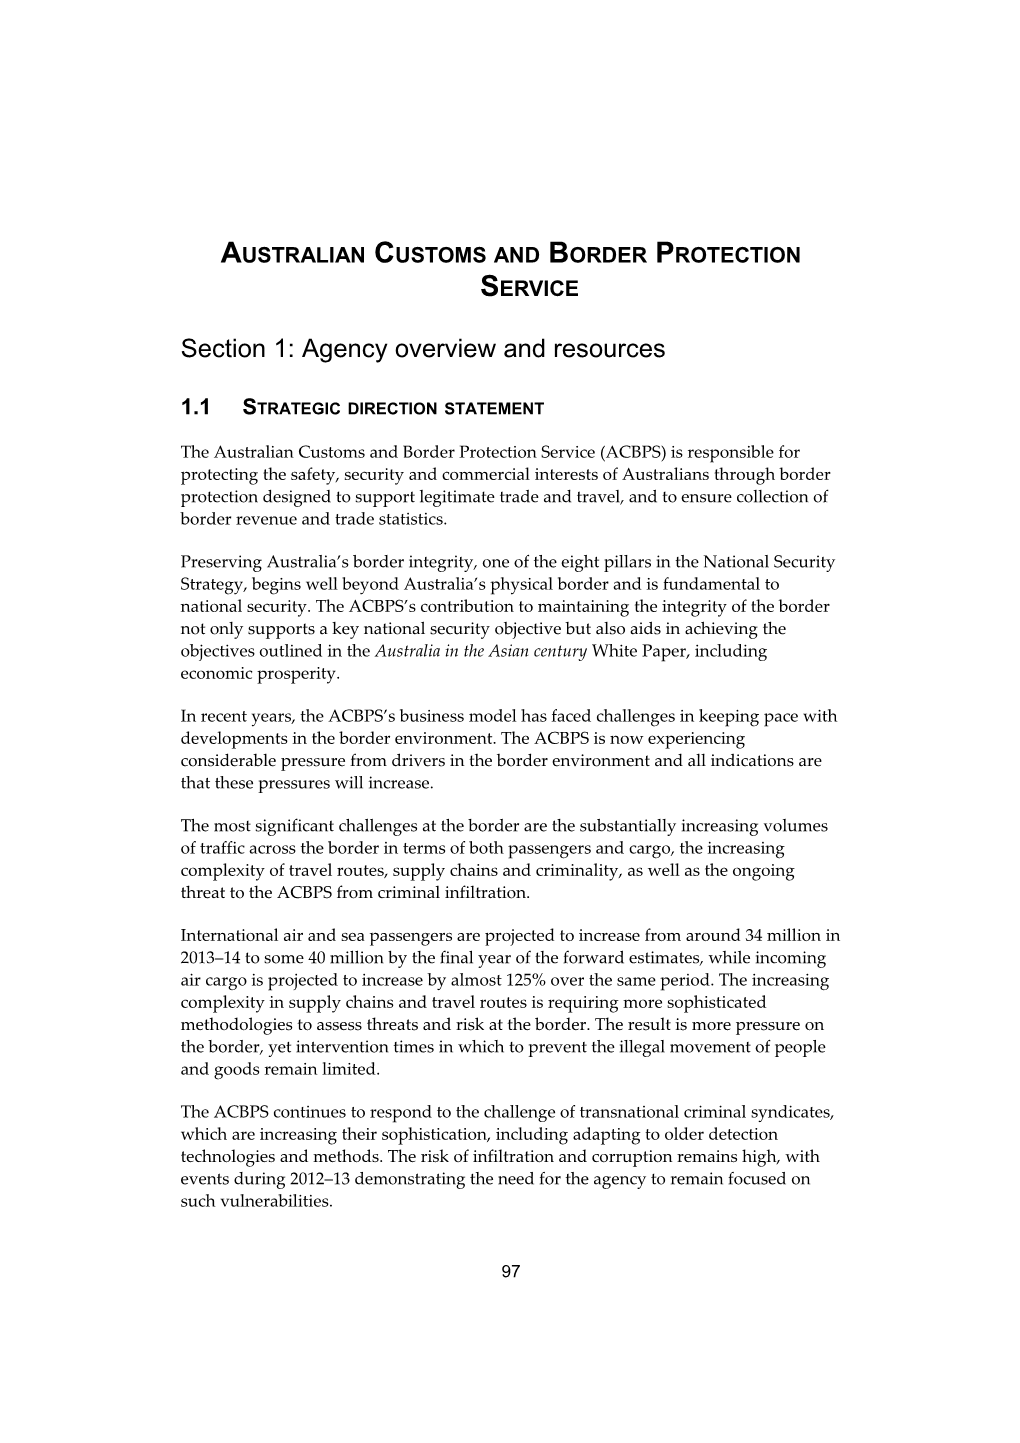 Australian Customs and Border Protection Service